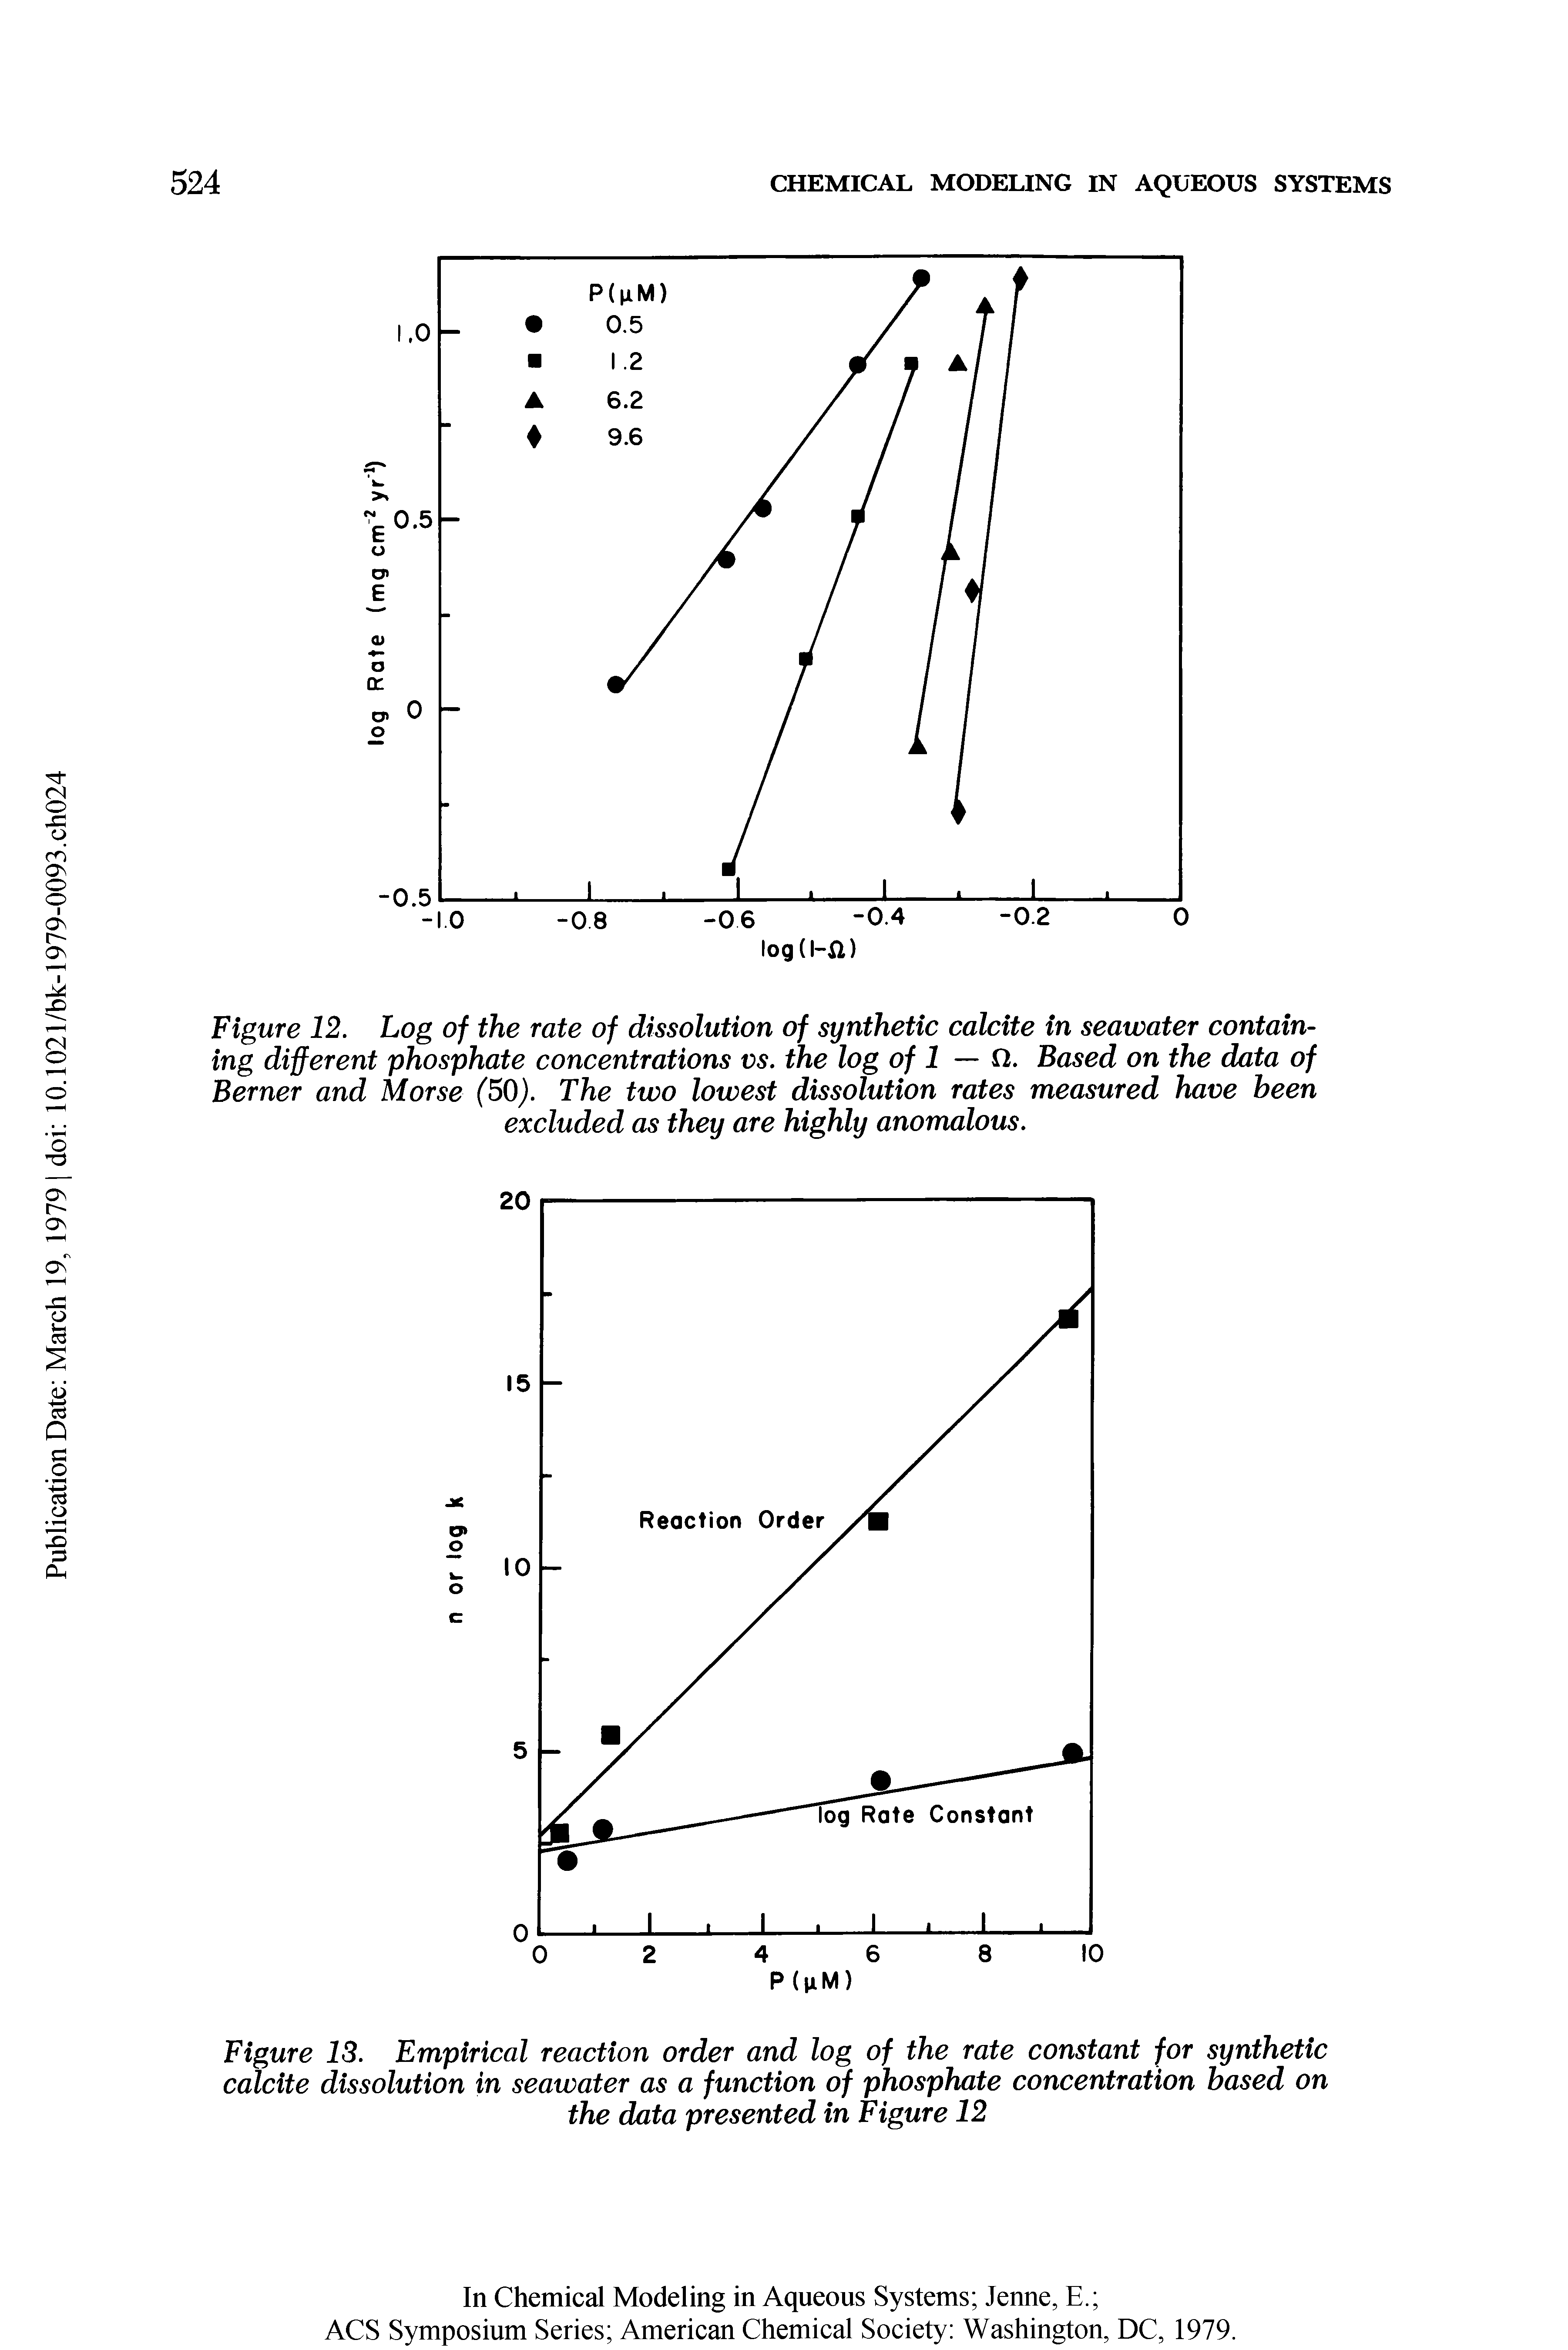 Figure 12. Log of the rate of dissolution of synthetic calotte in seawater containing different phosphate concentrations vs. the log of 1 — n. Based on the data of Berner and Morse (SO). The two lowest dissolution rates measured have been excluded as they are highly anomalous.